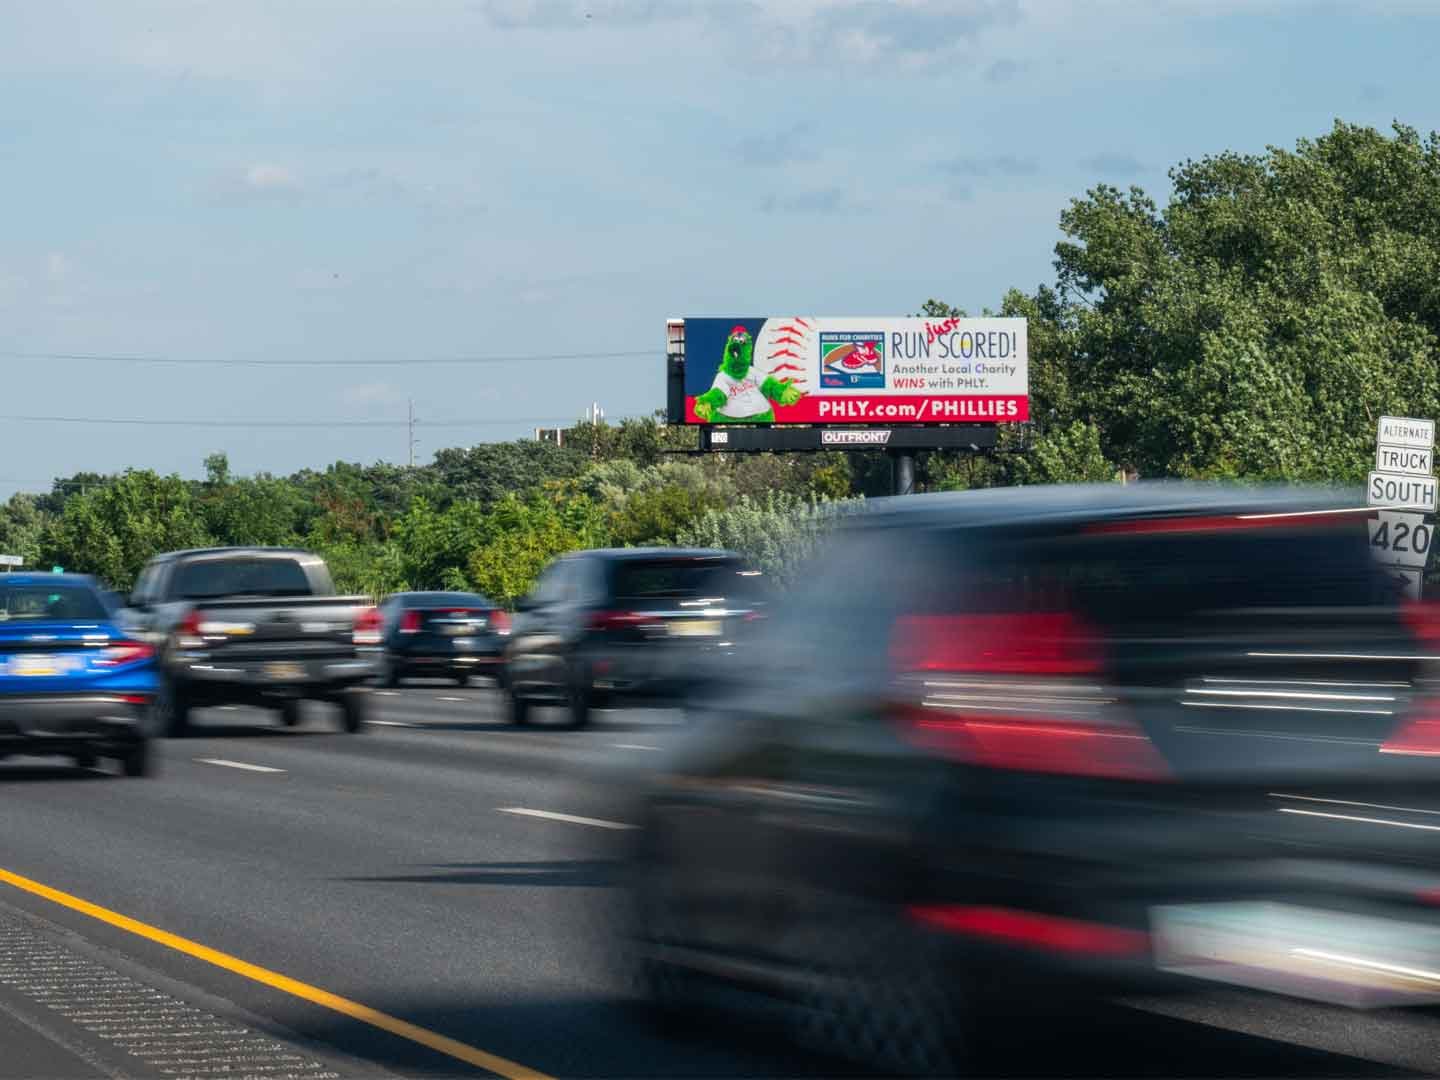 out of home billboard advertising philly phillies